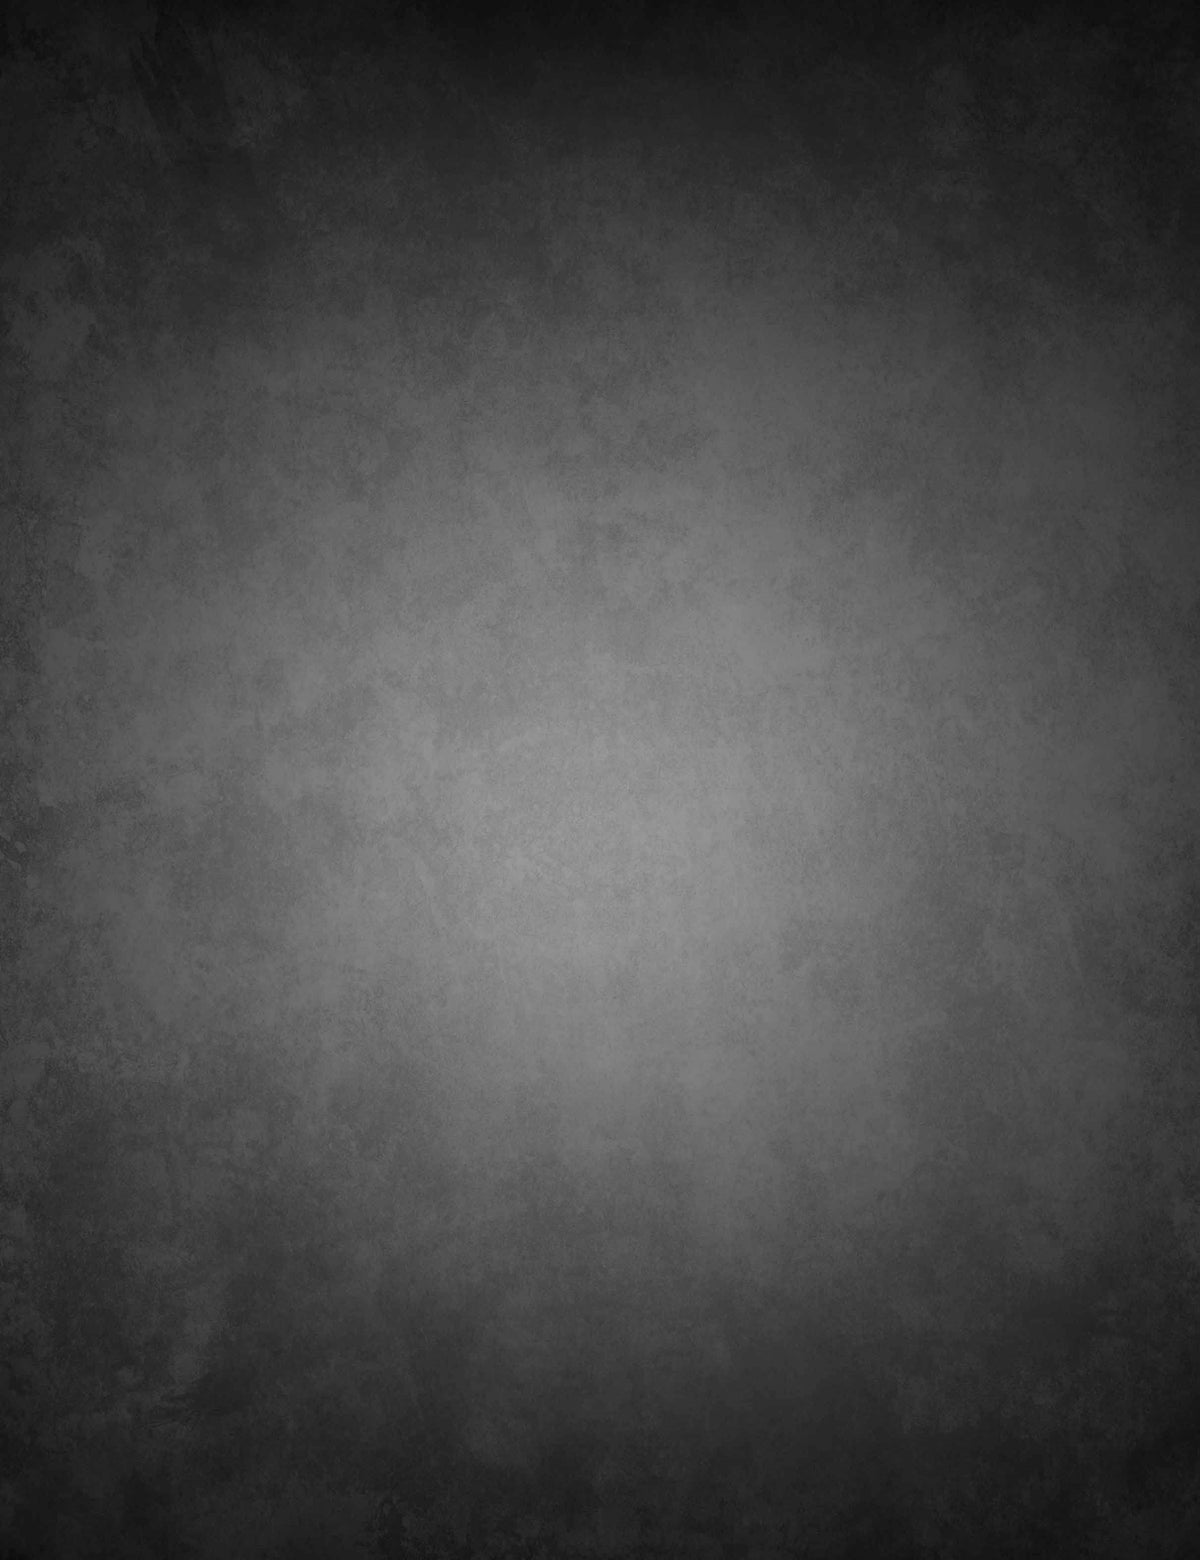 Black With Light Gray In center Abstract Photography Backdrop J-0498 Shopbackdrop